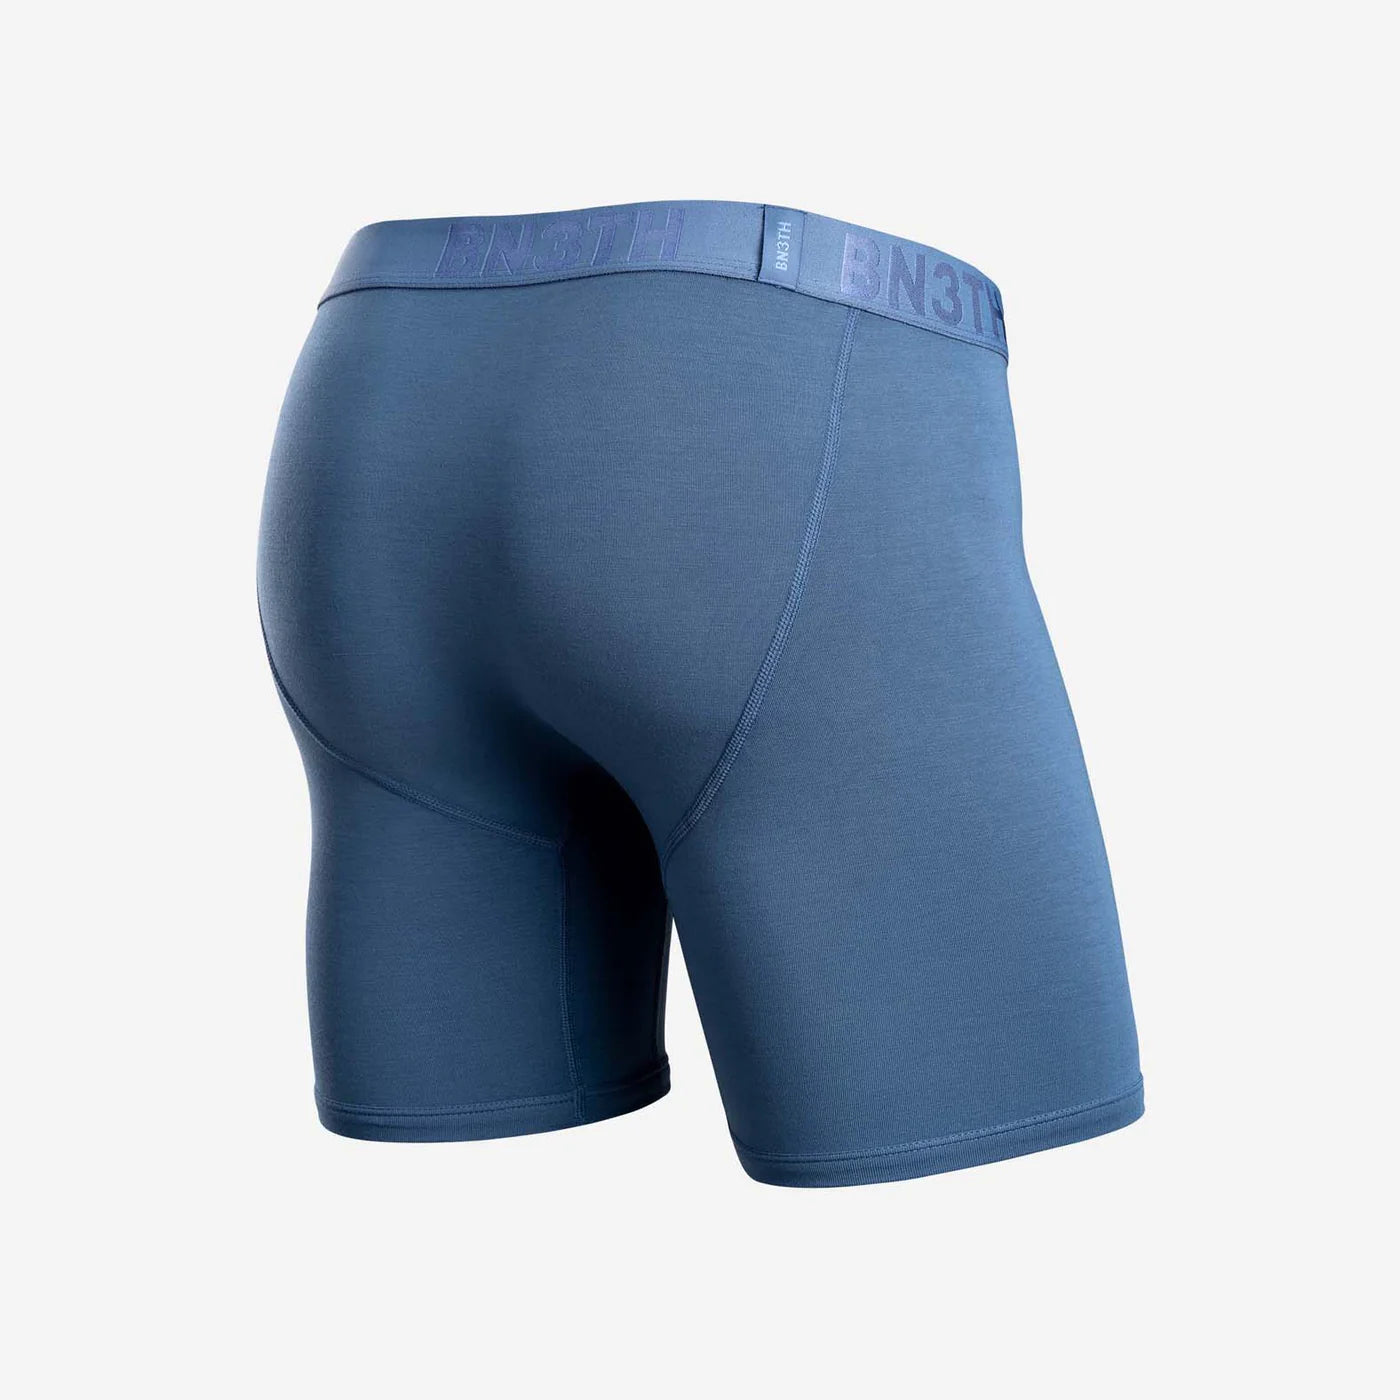 These luxury Boxer Briefs feature an ultra-soft, breathable, lightweight Tencel Modal that is sustainably sourced, guaranteed to stay smooth and keep you comfortably supported at all times. 